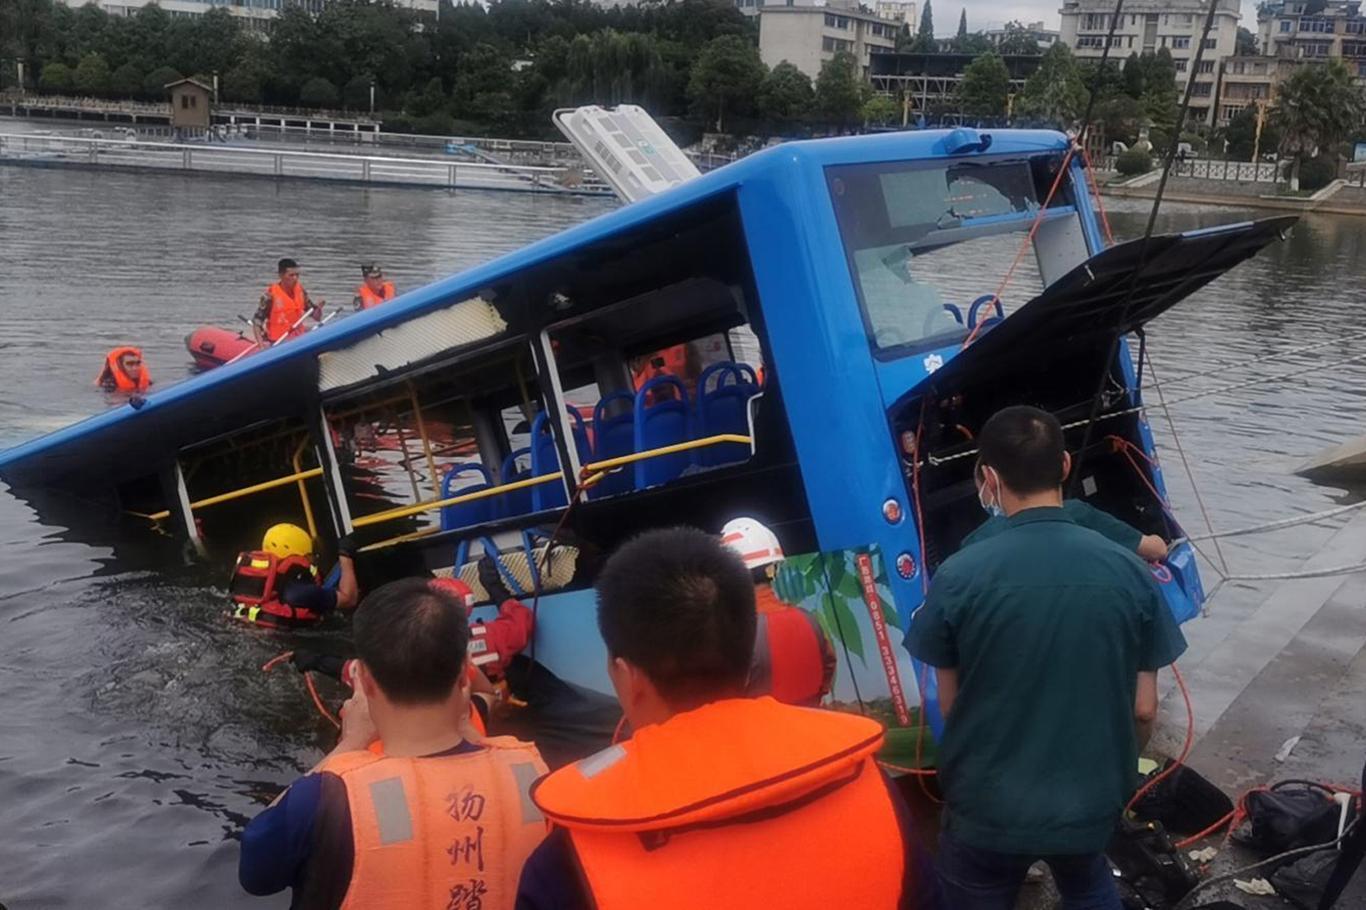 Bus crash in China: 21 dead, 15 injured